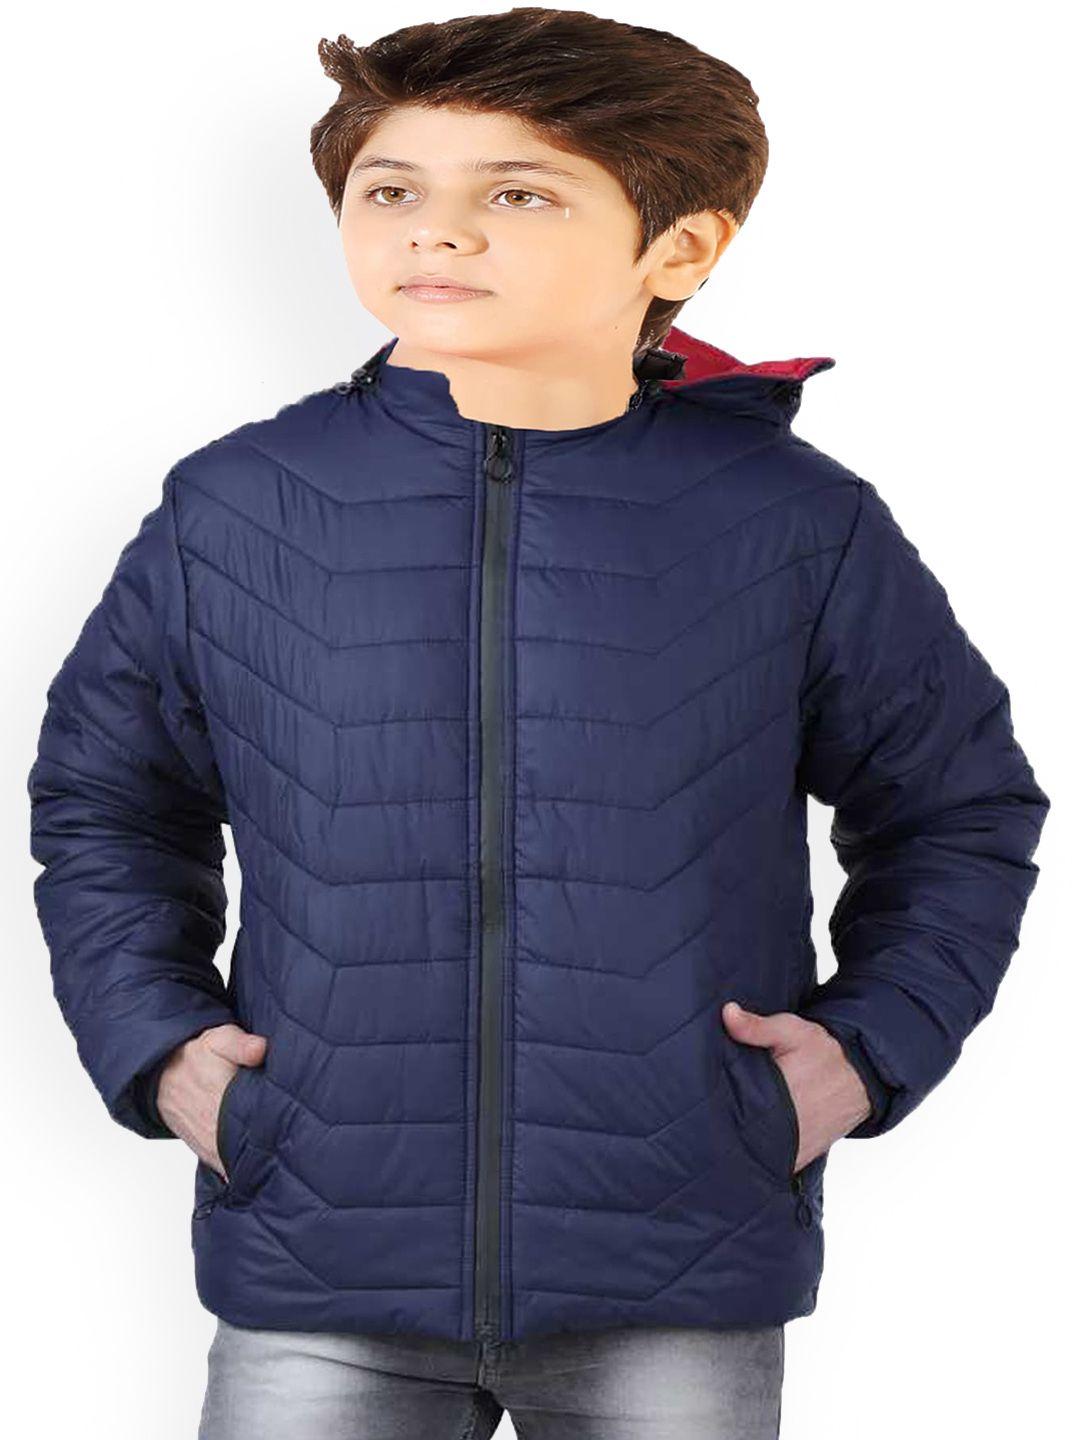 baesd boys hooded quilted jacket